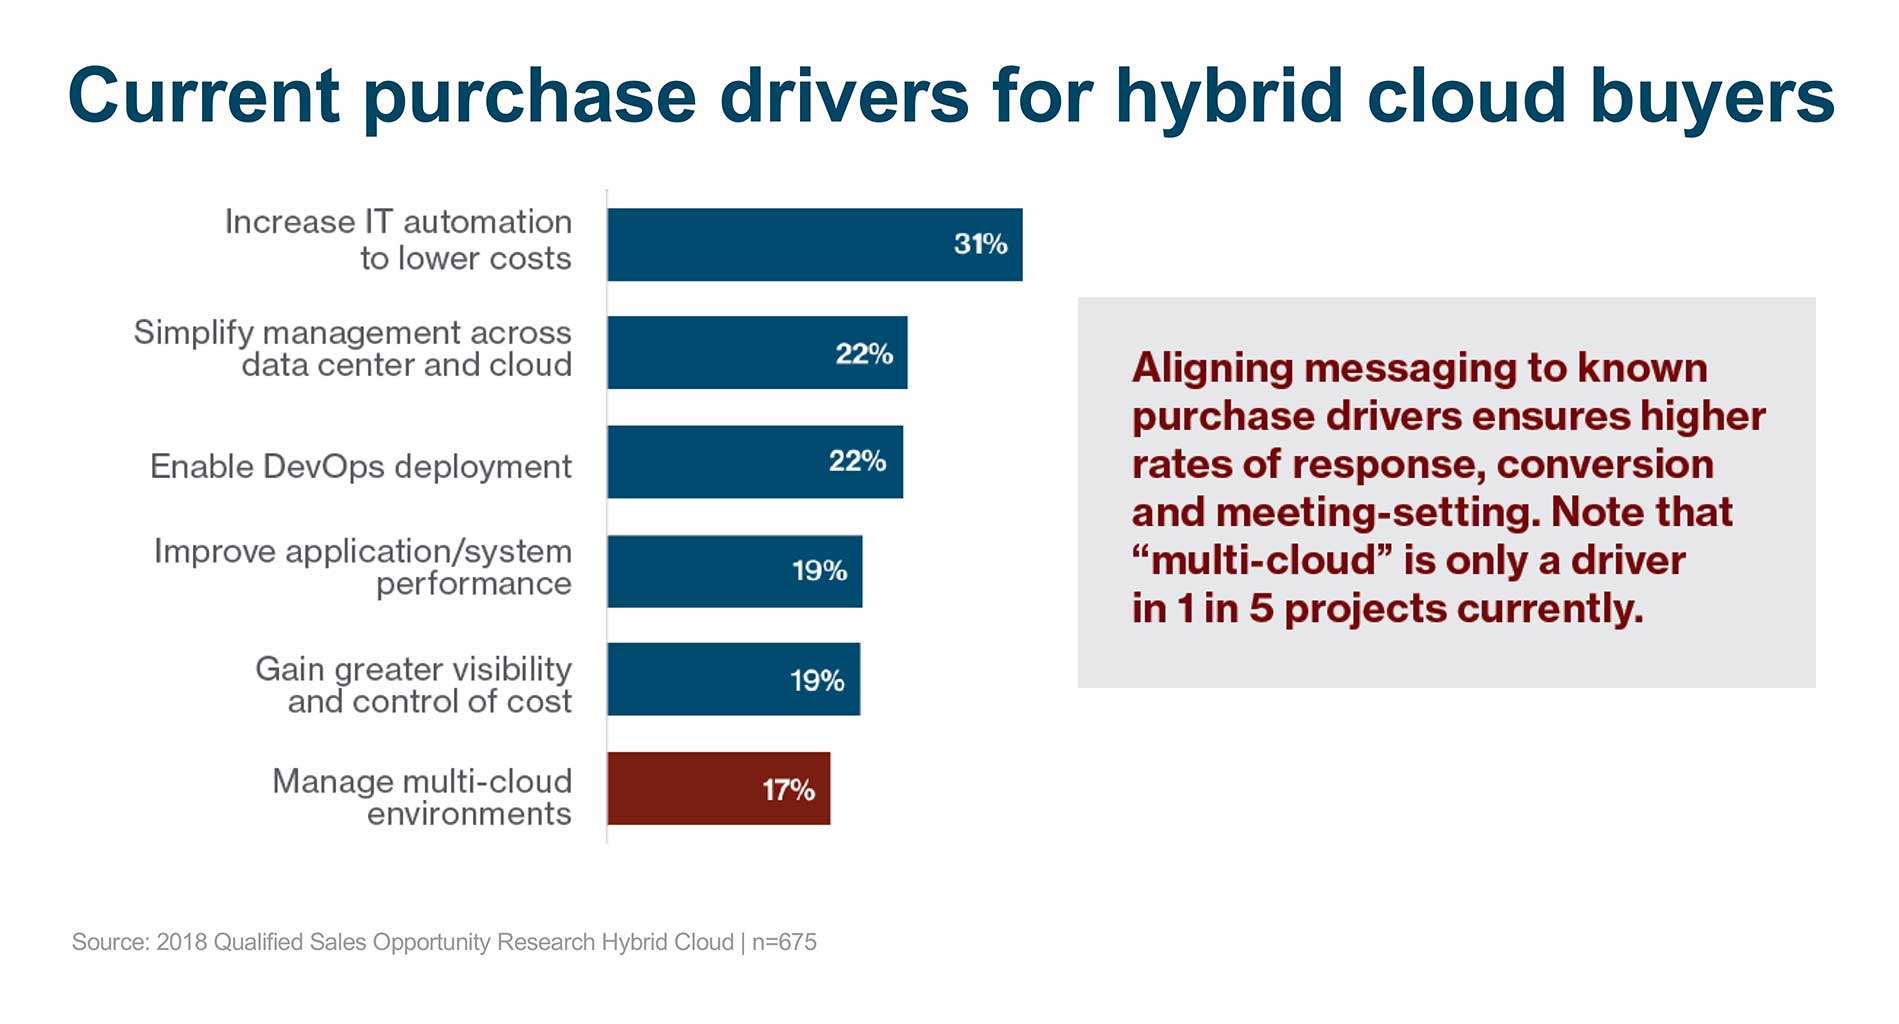 Current purchase drivers for hybrid cloud buyers